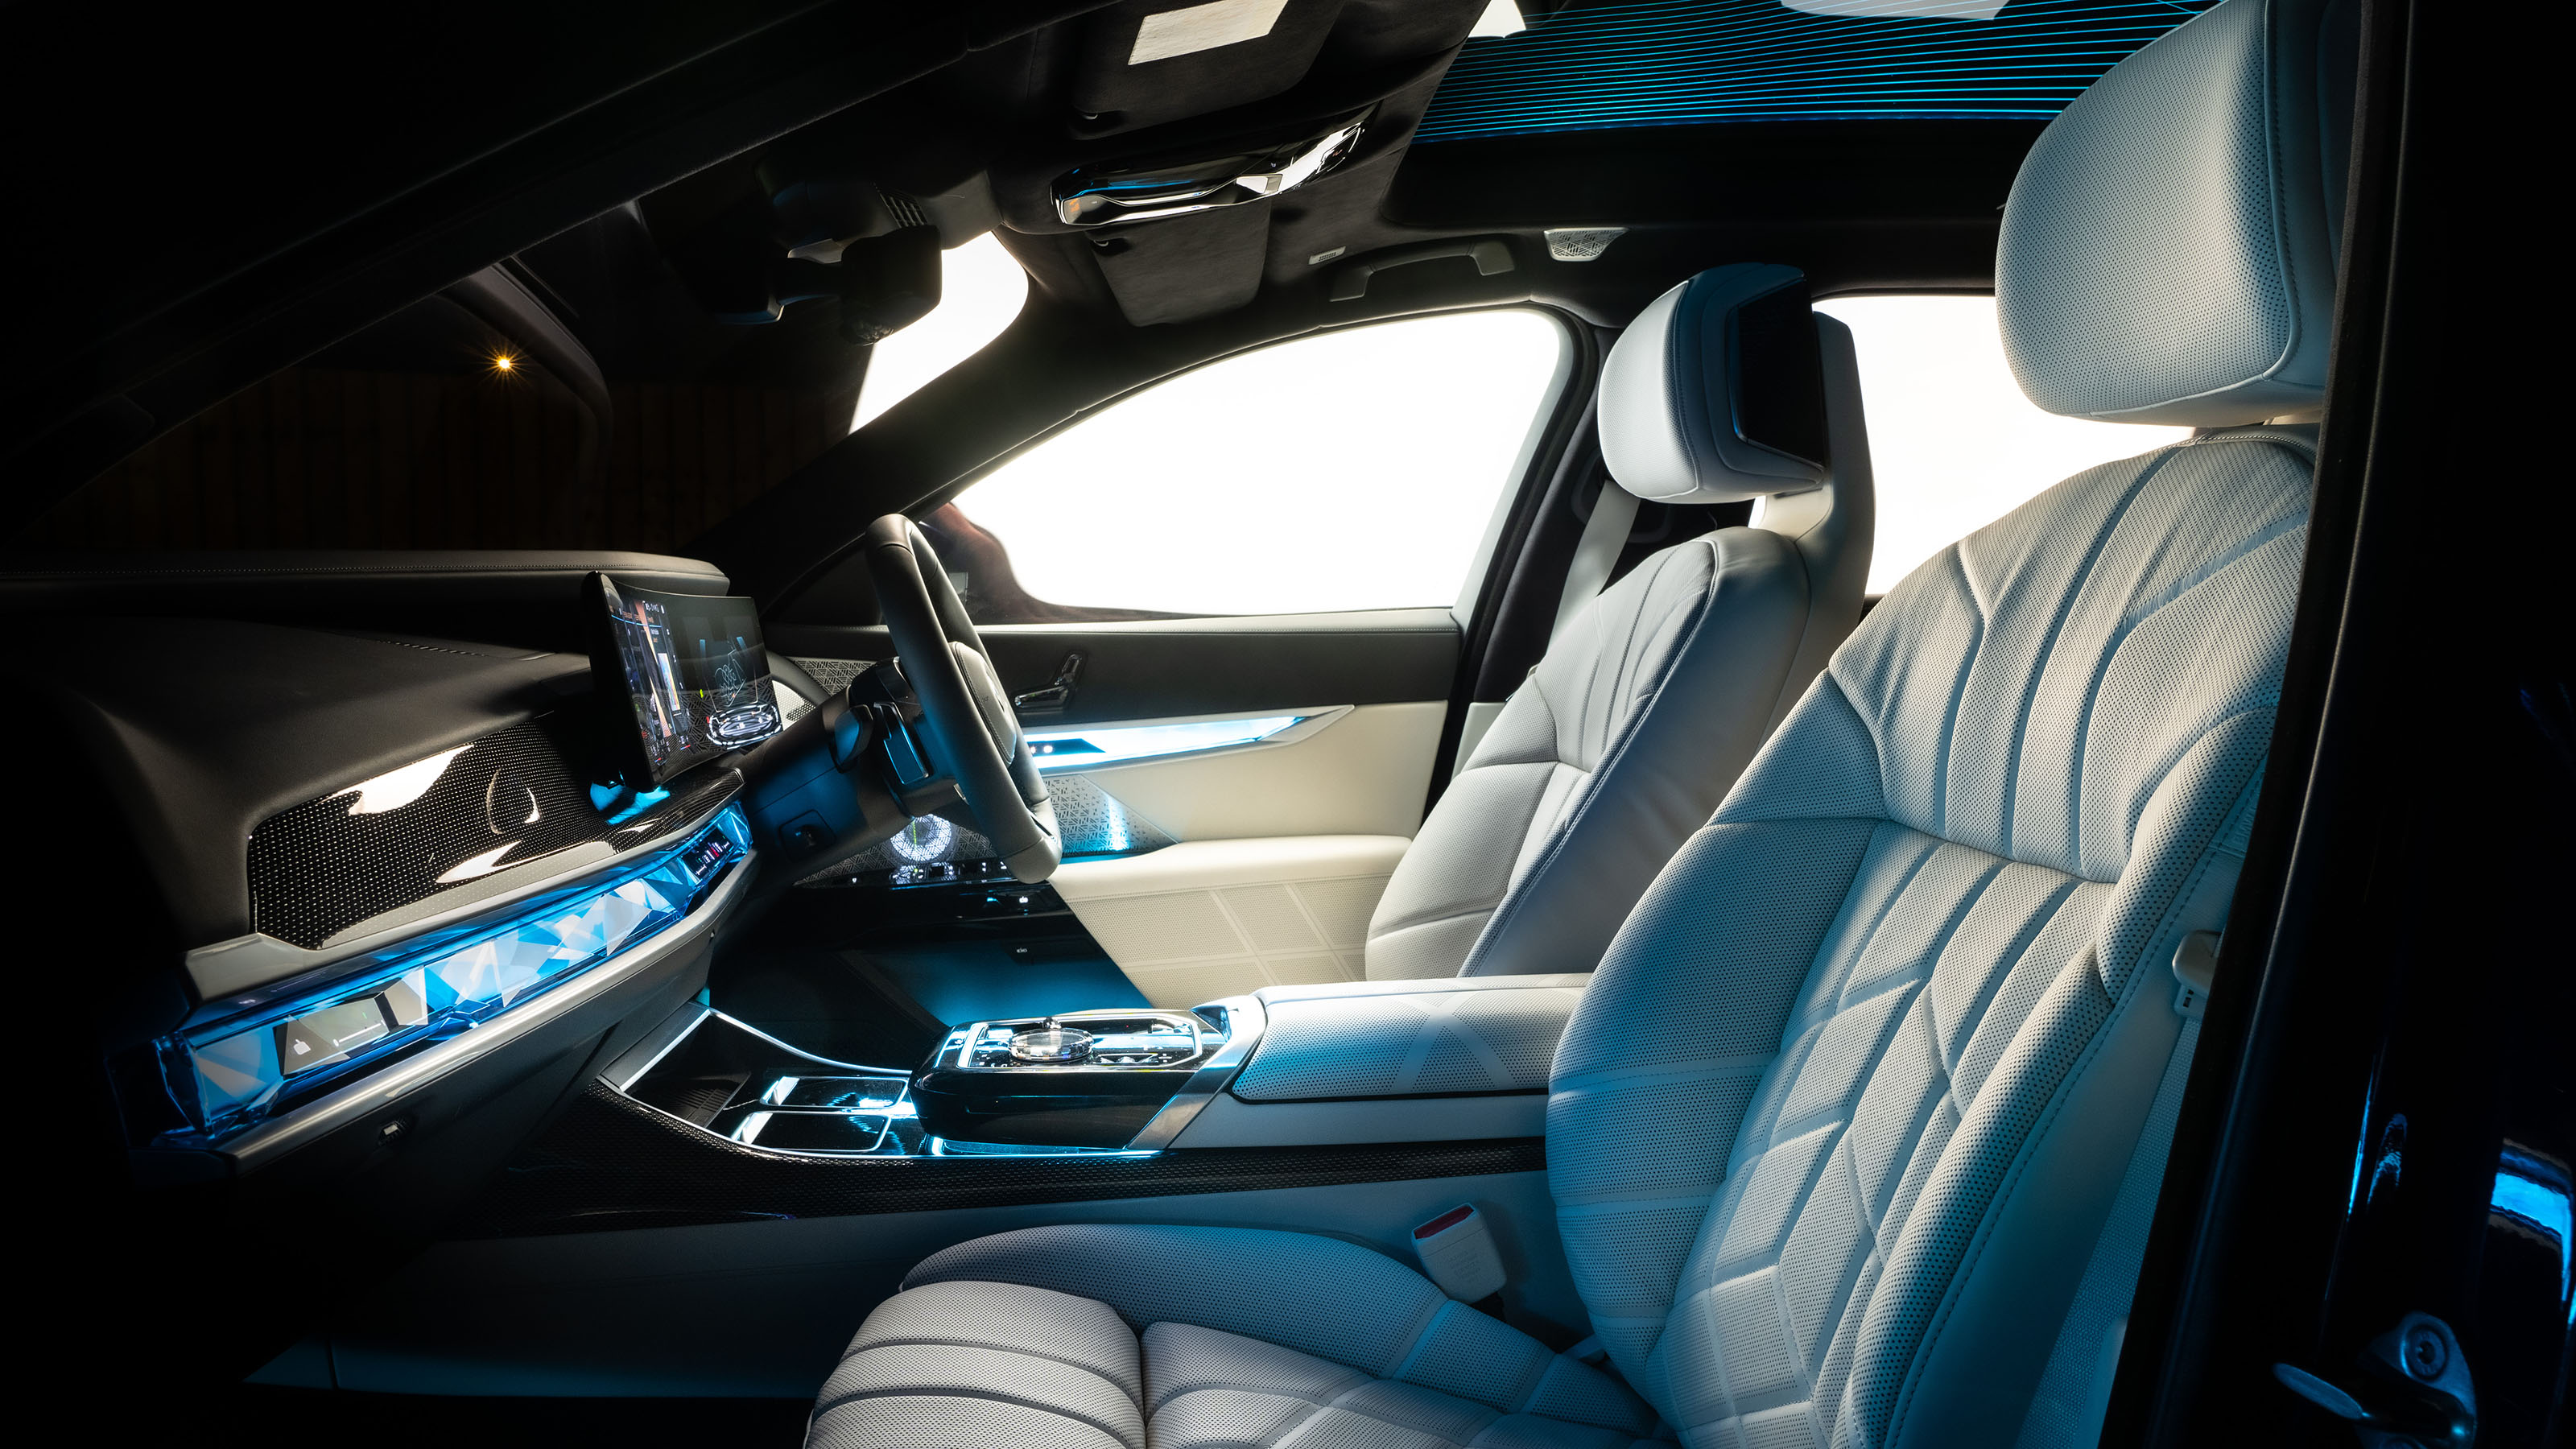 BMW i7's backseat makes the fully-electric worth the price